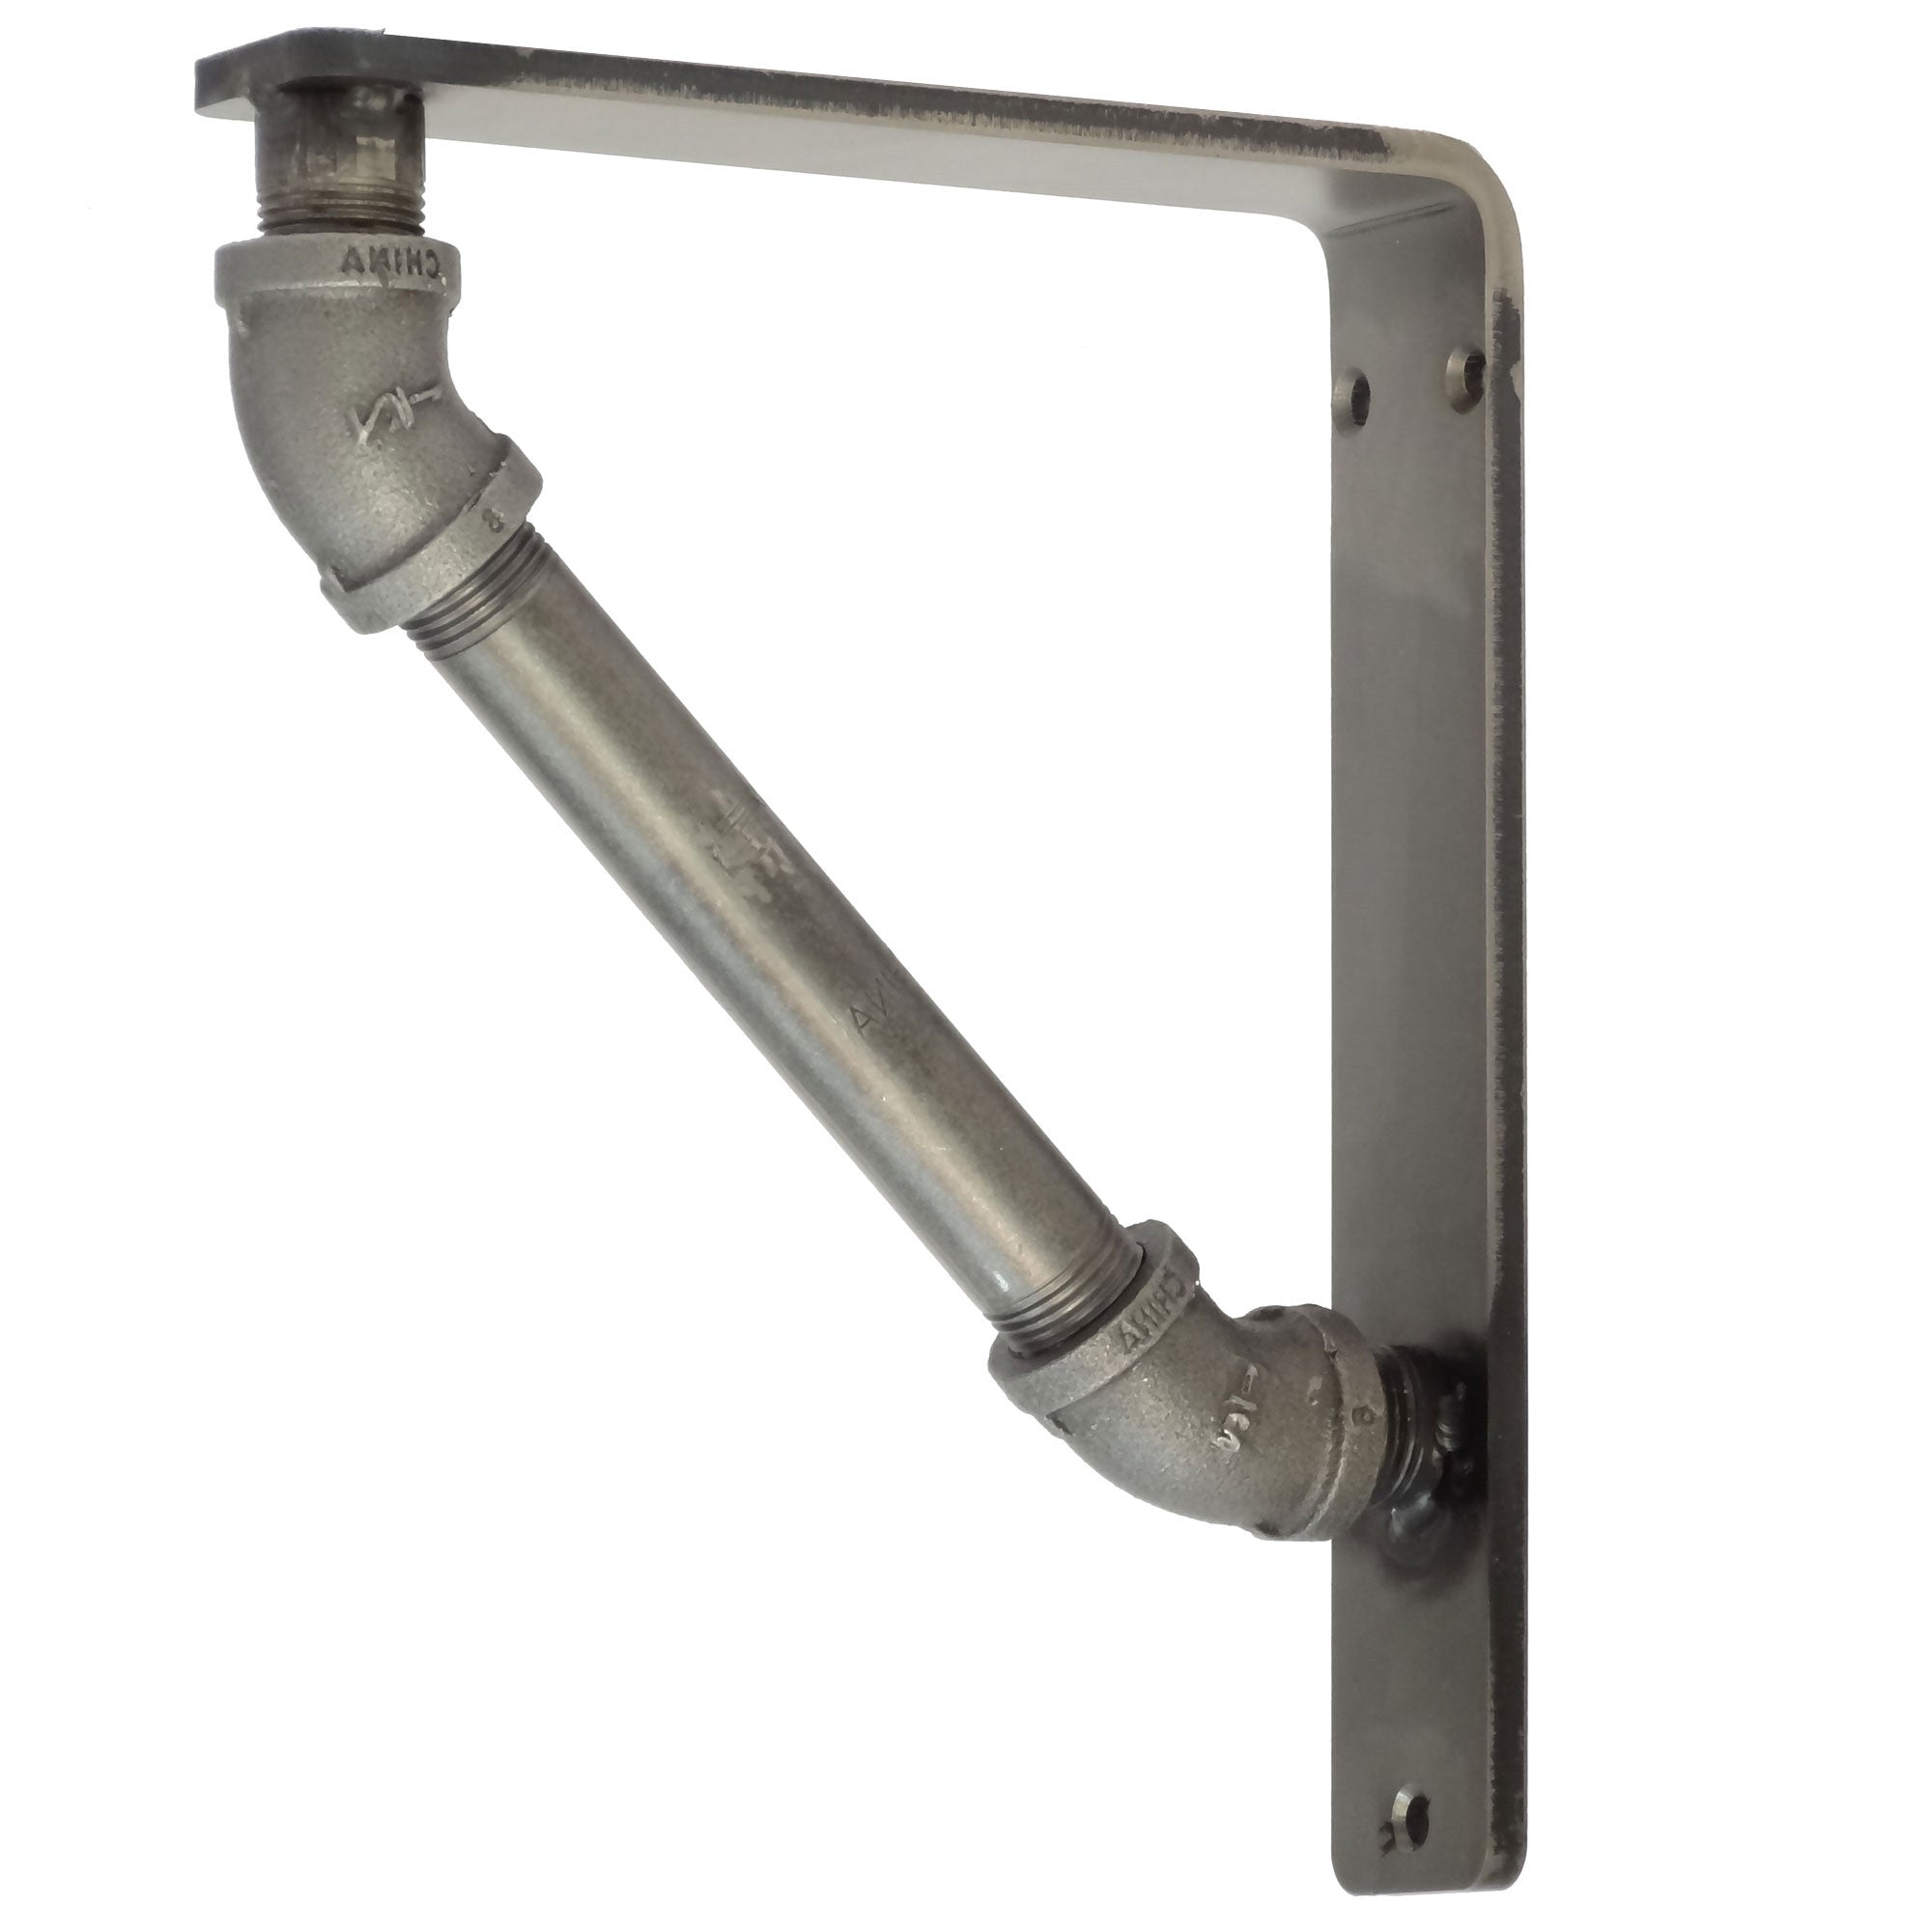 Pictured here is our 1.5inch wide Industrial Iron Shelf Bracket. This is the same bracket as our 1.5 Industrial Iron Corbel.